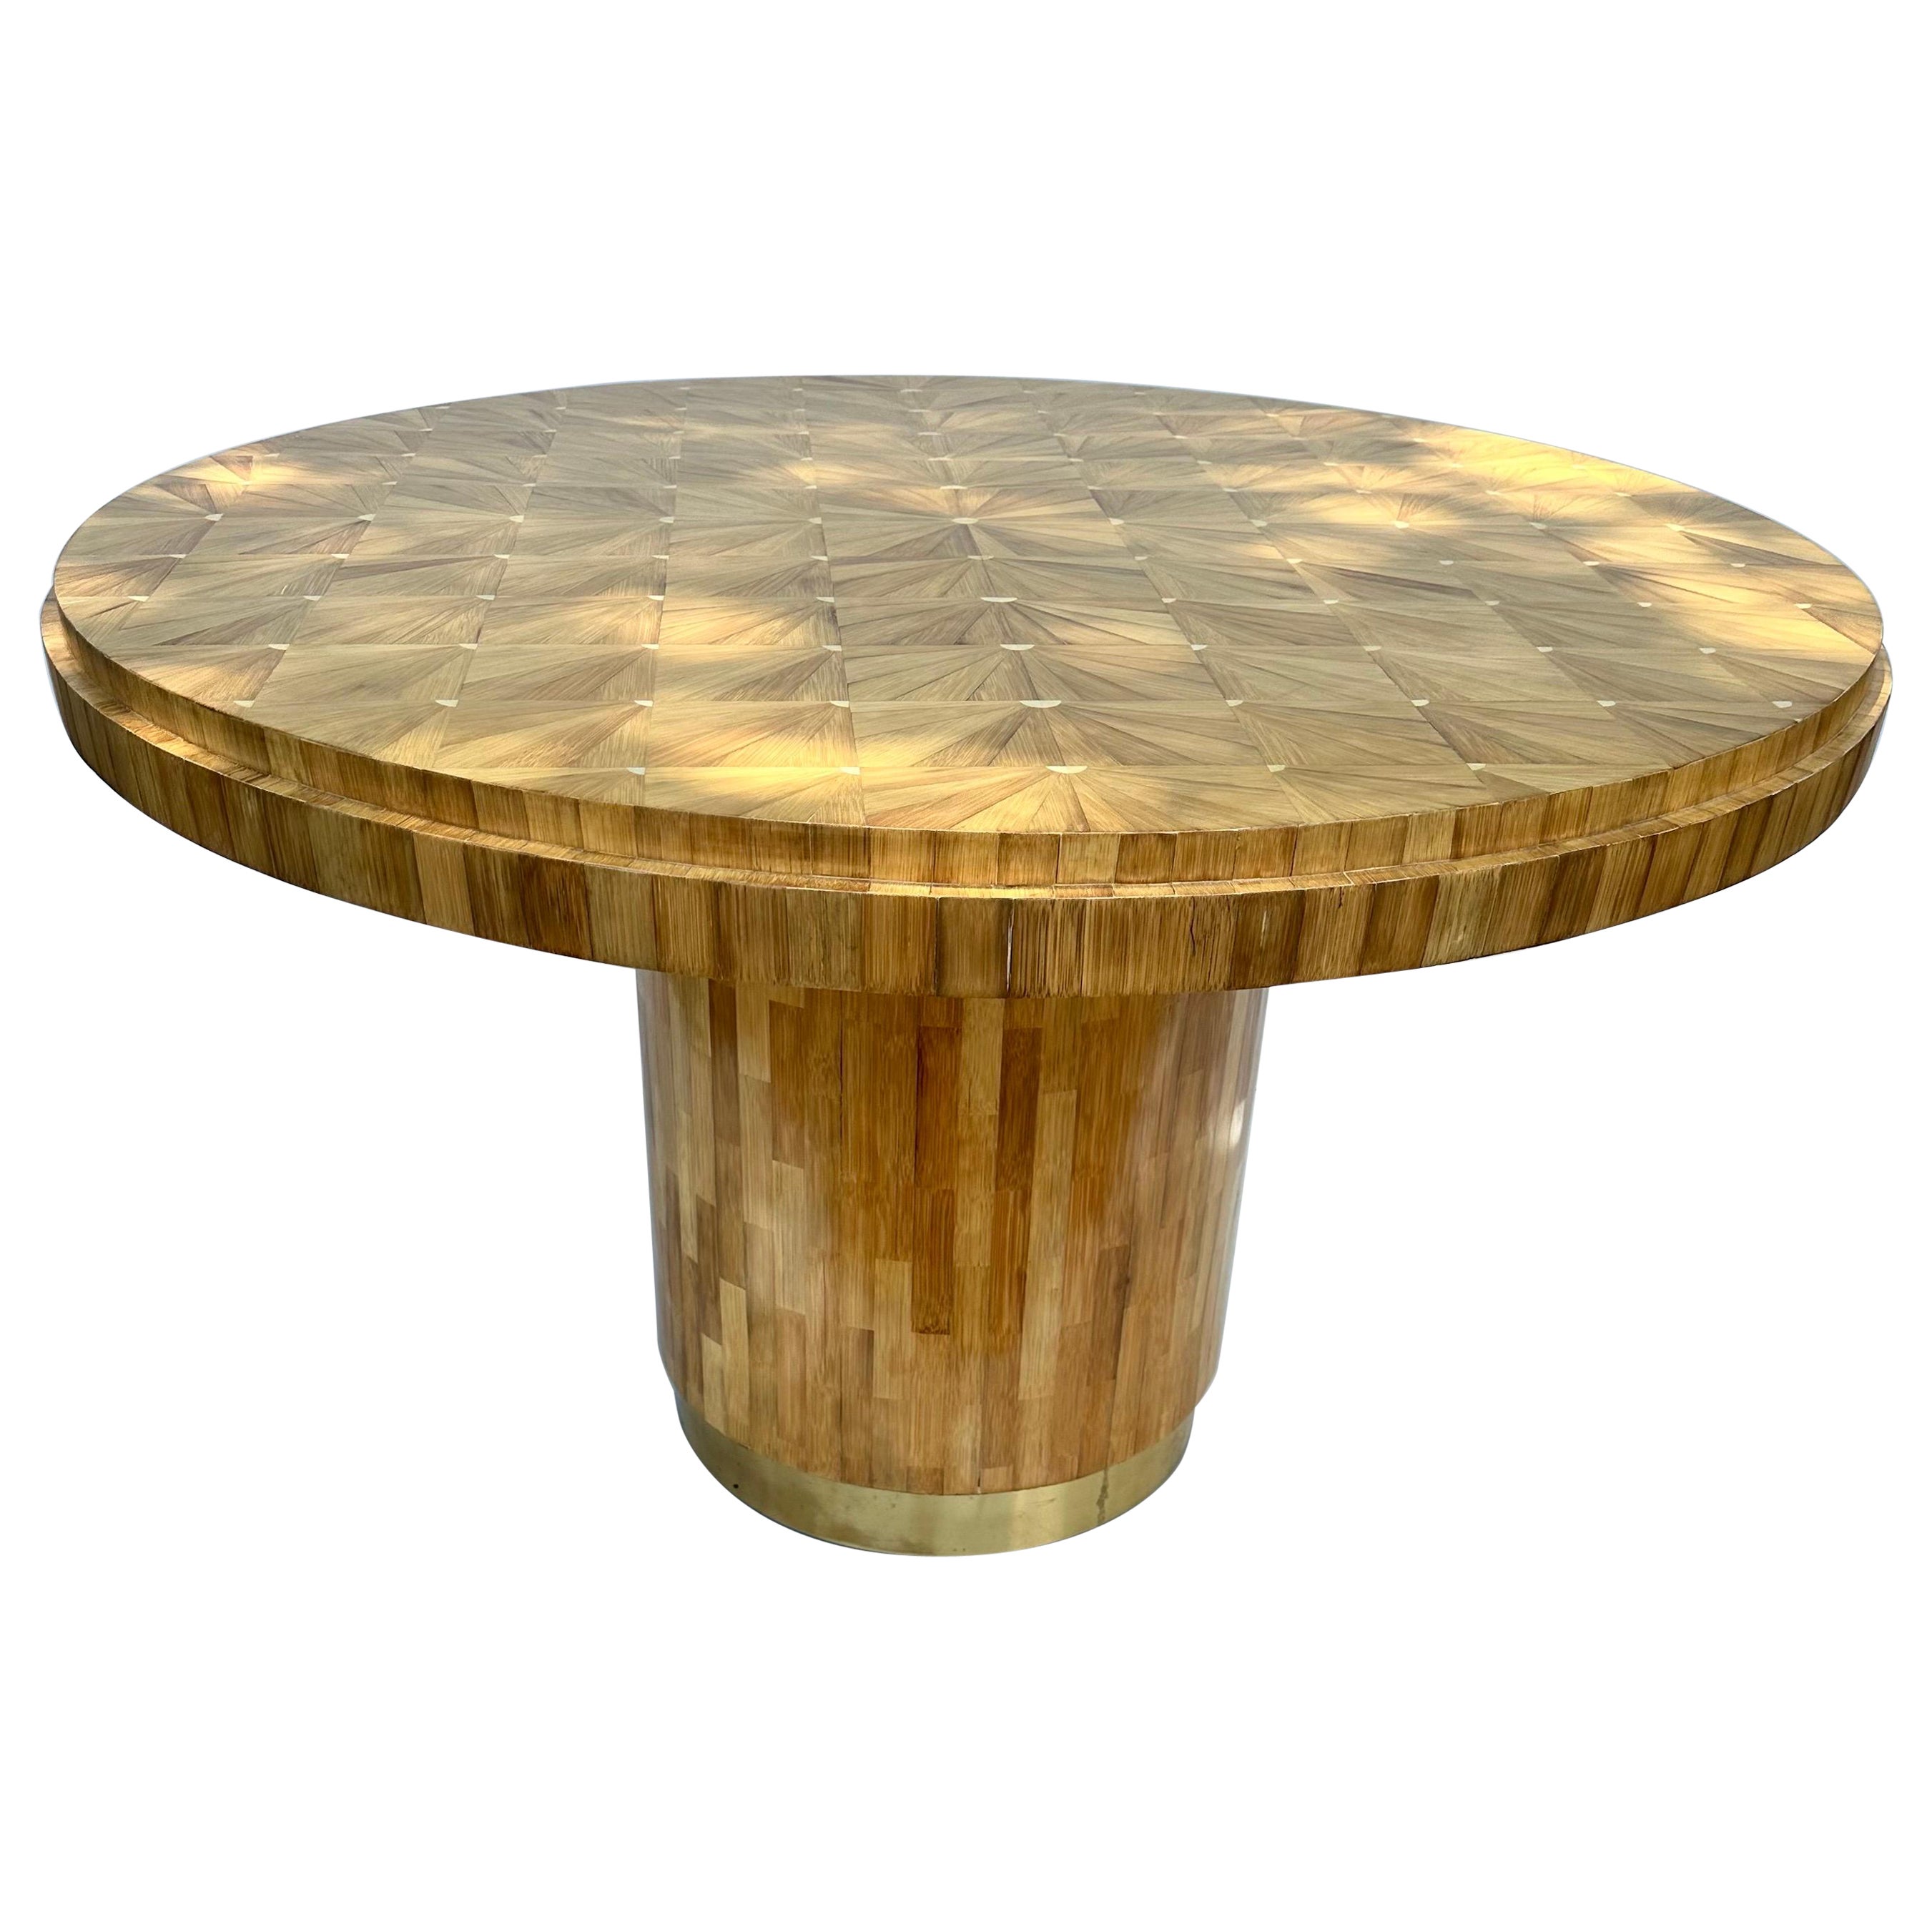 Ron Seff Raffia Marquetery dining room table  For Sale